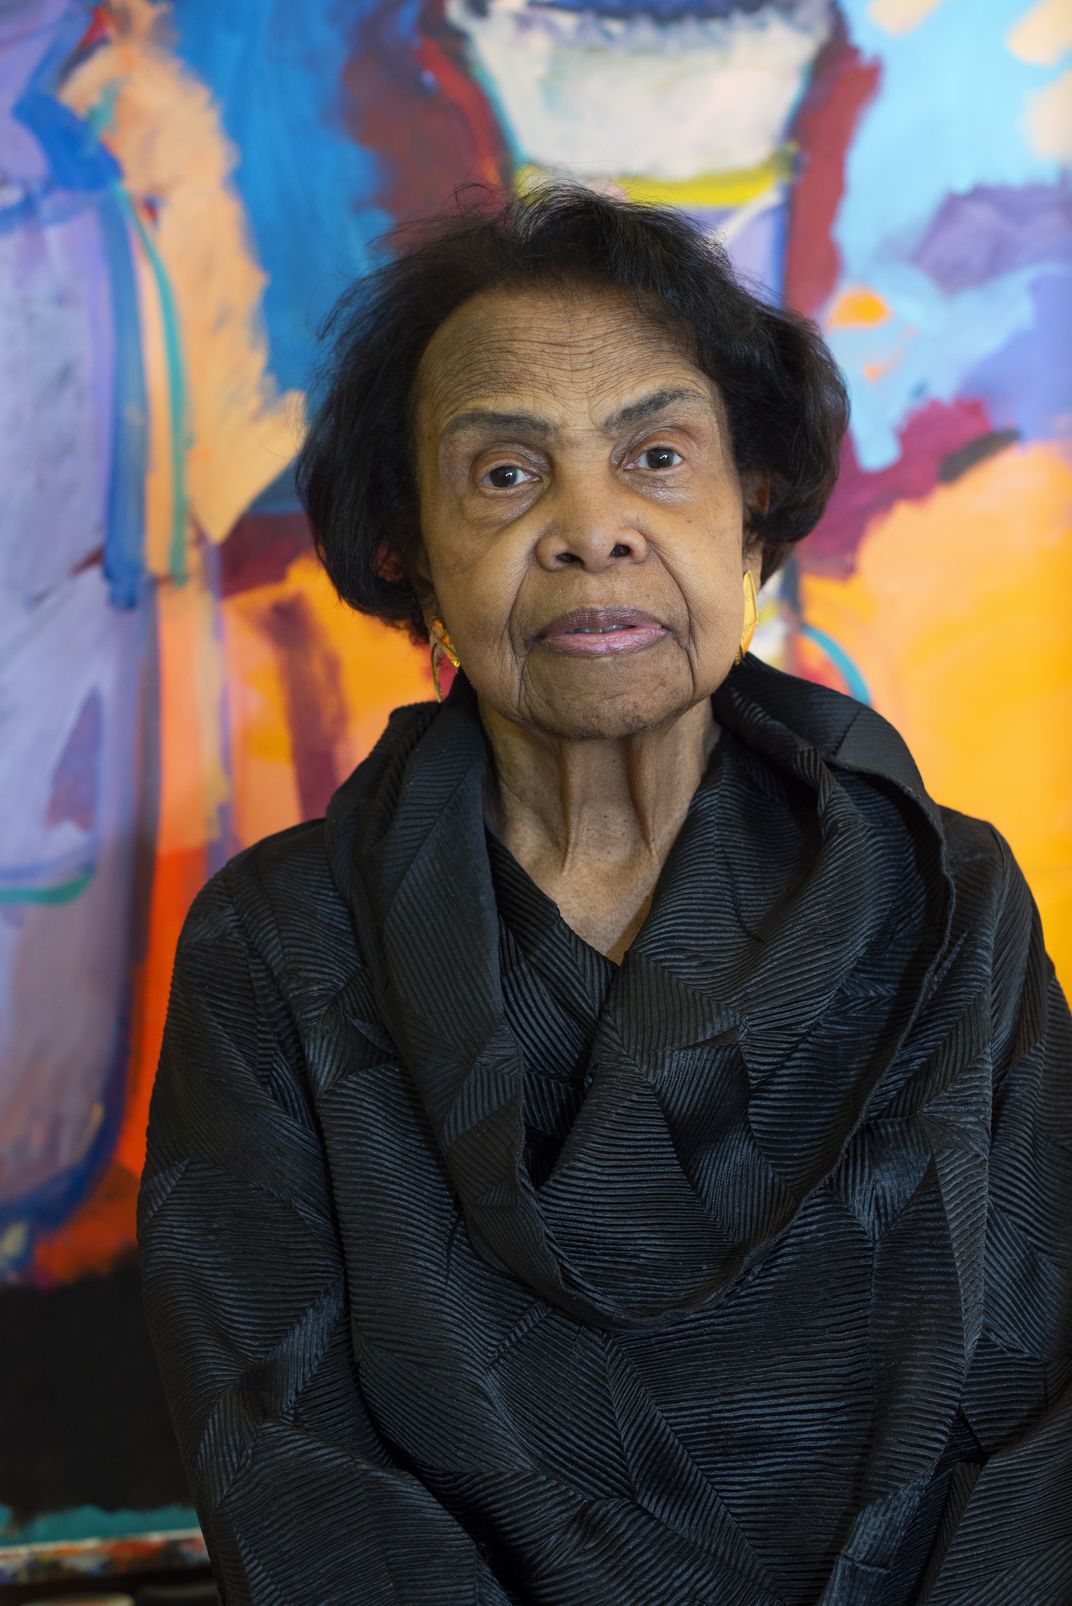 A picture of Woodson, a Black woman in her 80s, standing in front of a colorful canvas and wearing a black blouse